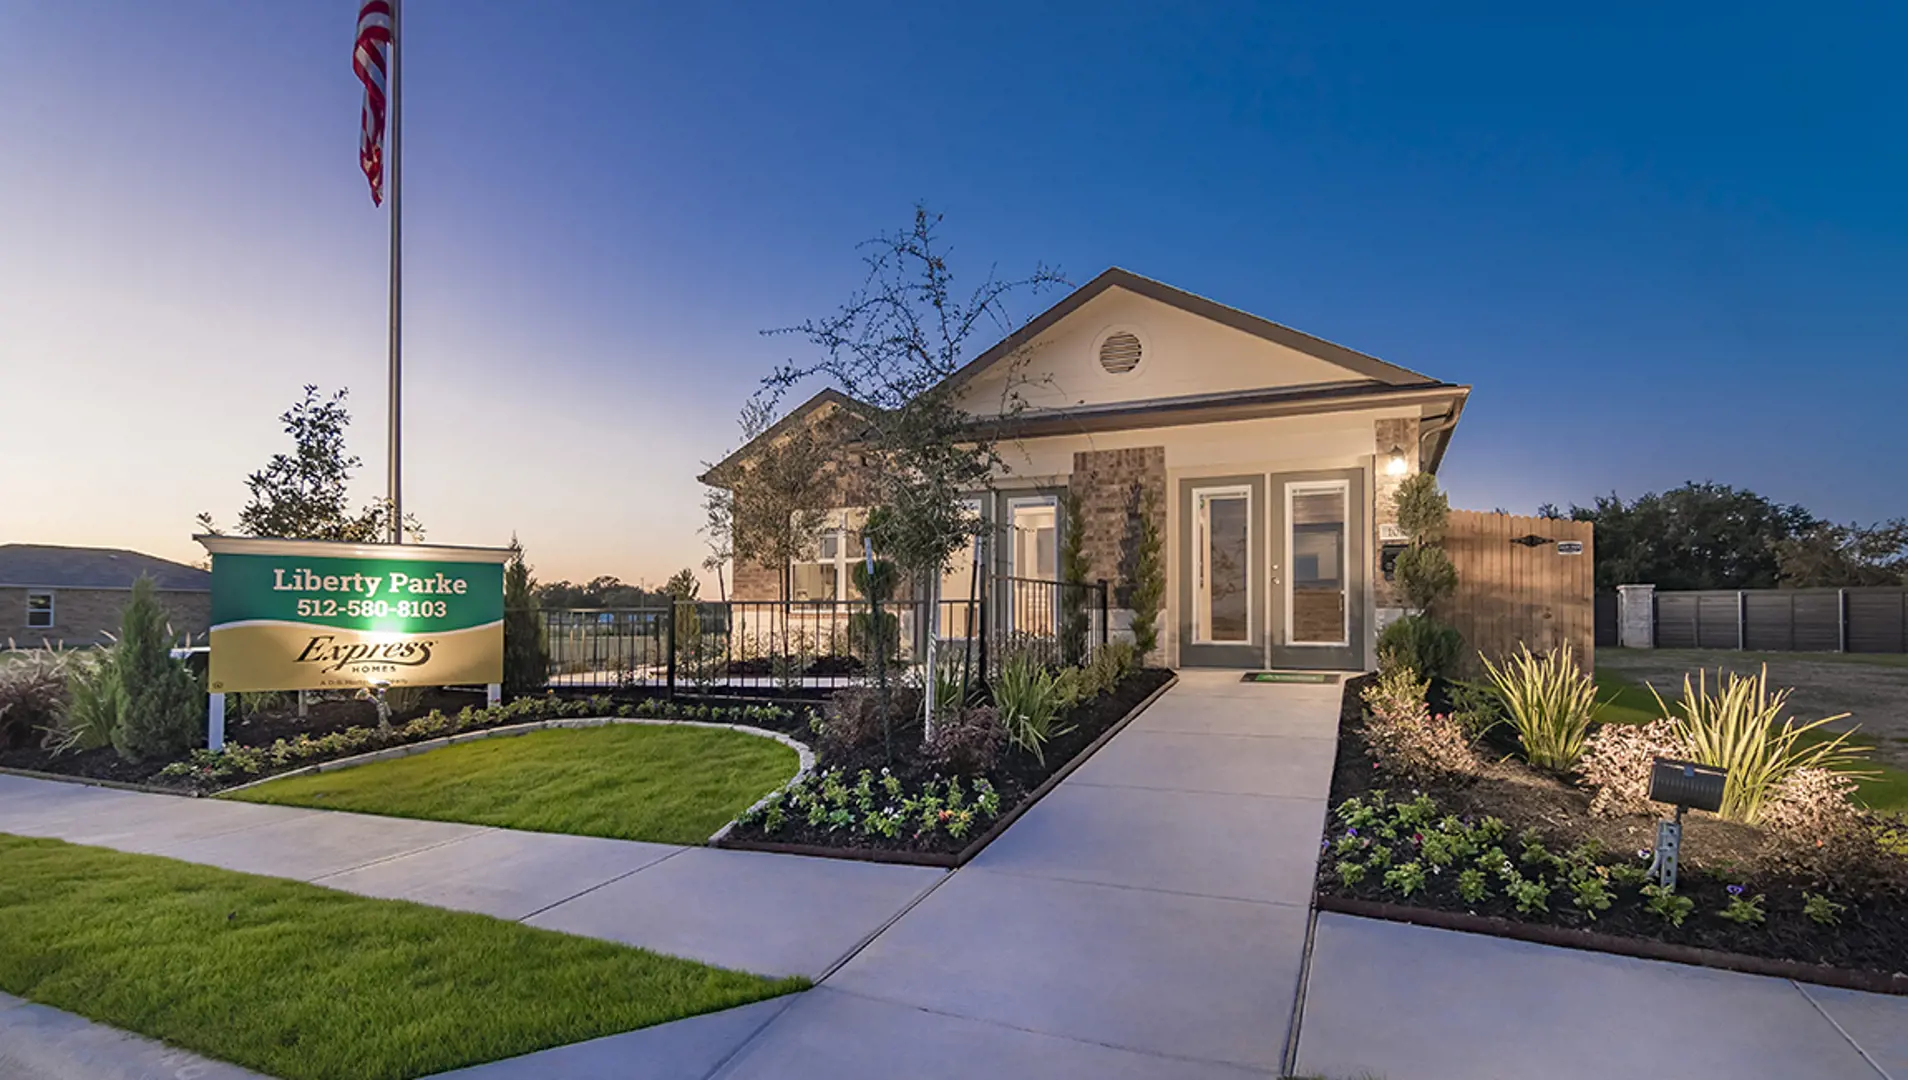 Liberty Parke by Express Homes in Liberty Hill TX | Livabl